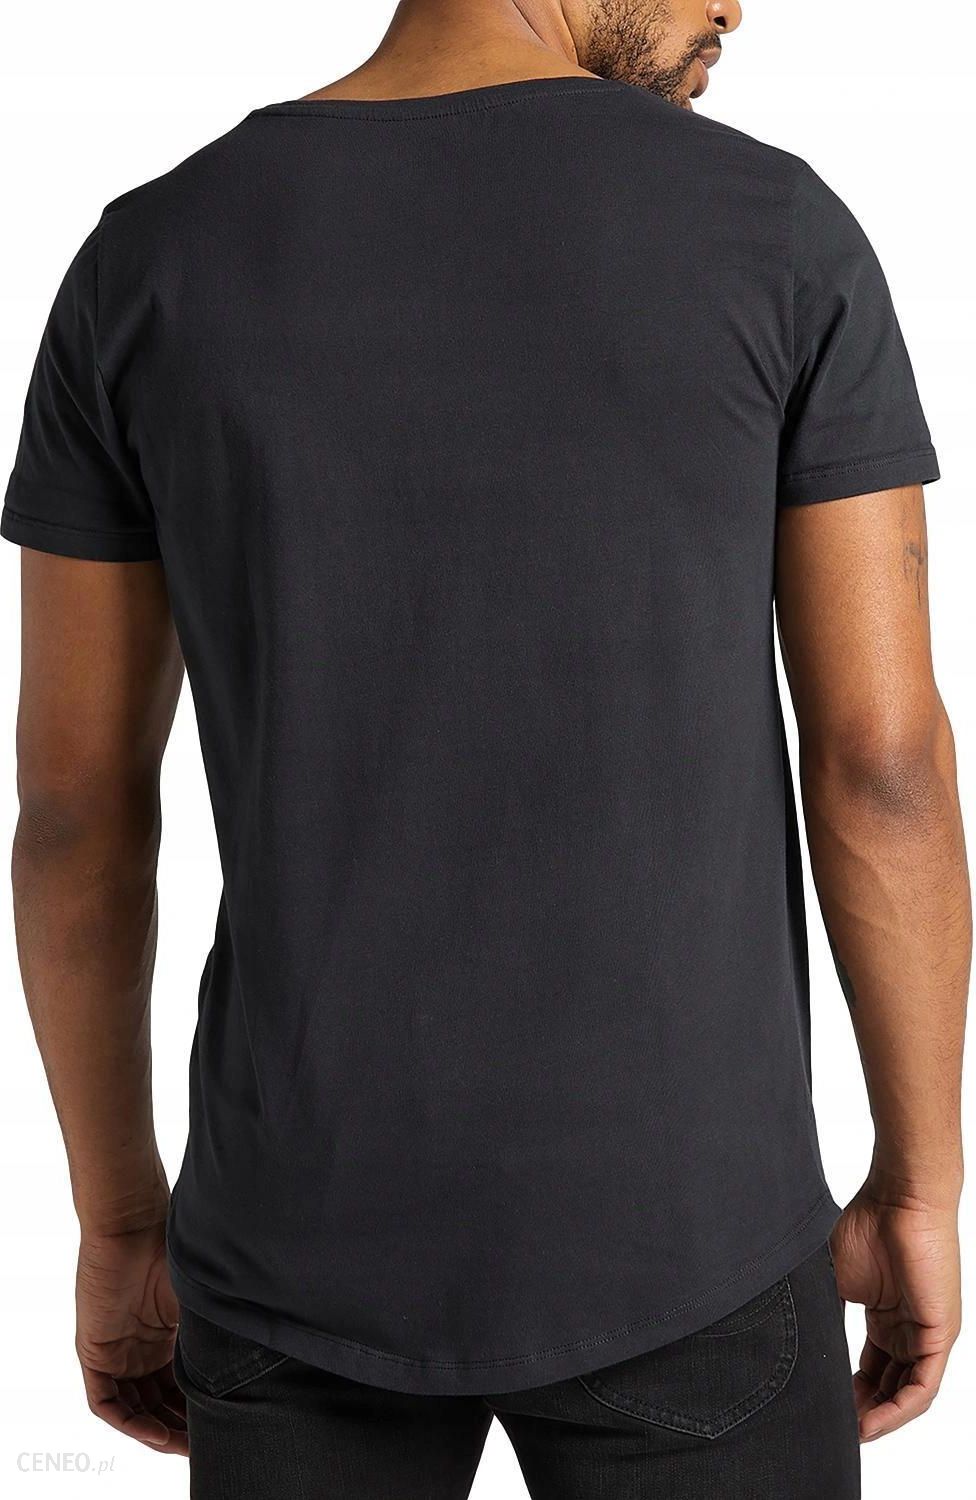 L62JEPJA opinie Tee i Ceny Black - M Washed Lee Shaped T-shirt